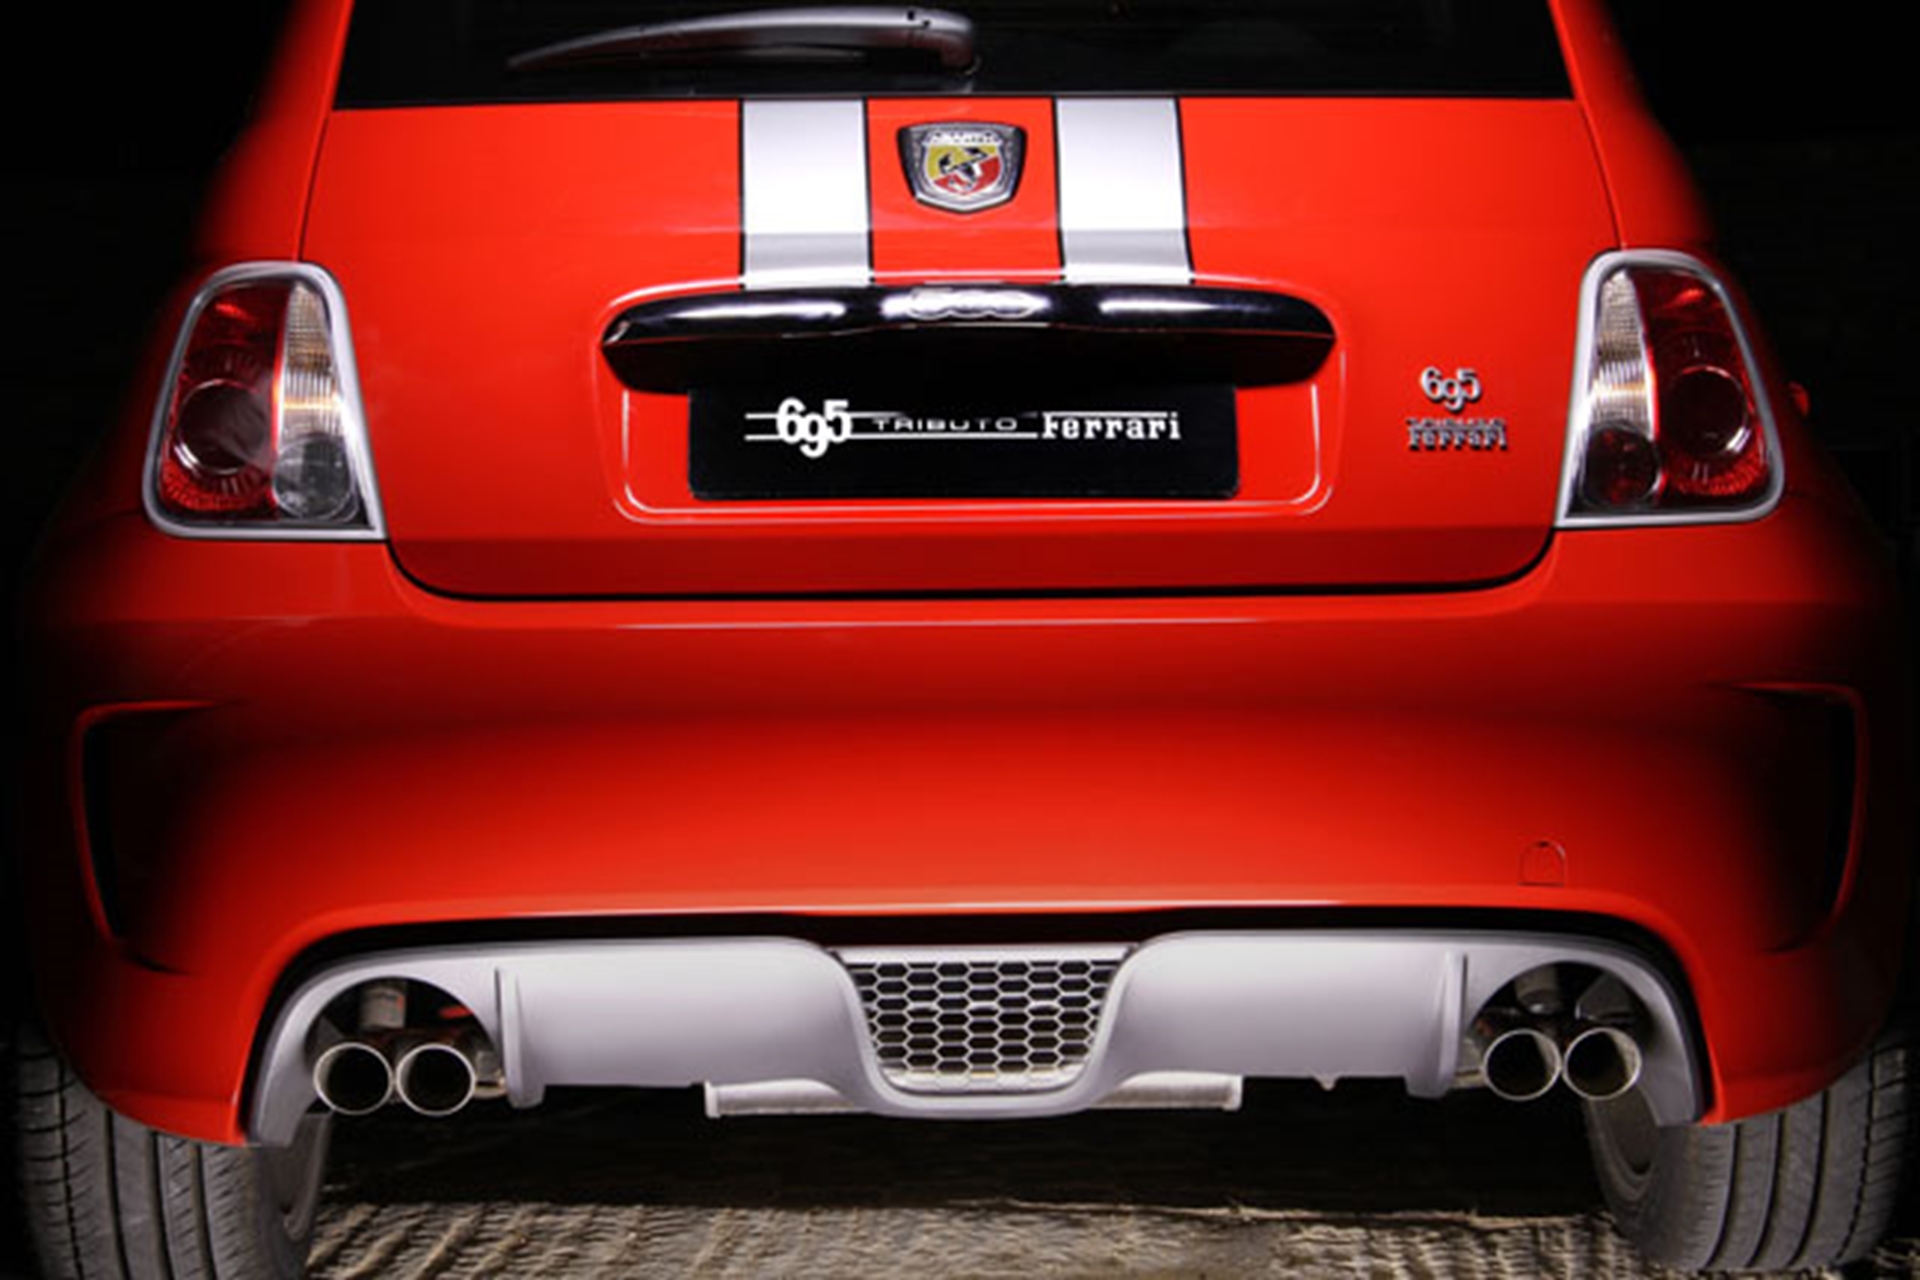 Italian legends join forces: Abarth and Ferrari